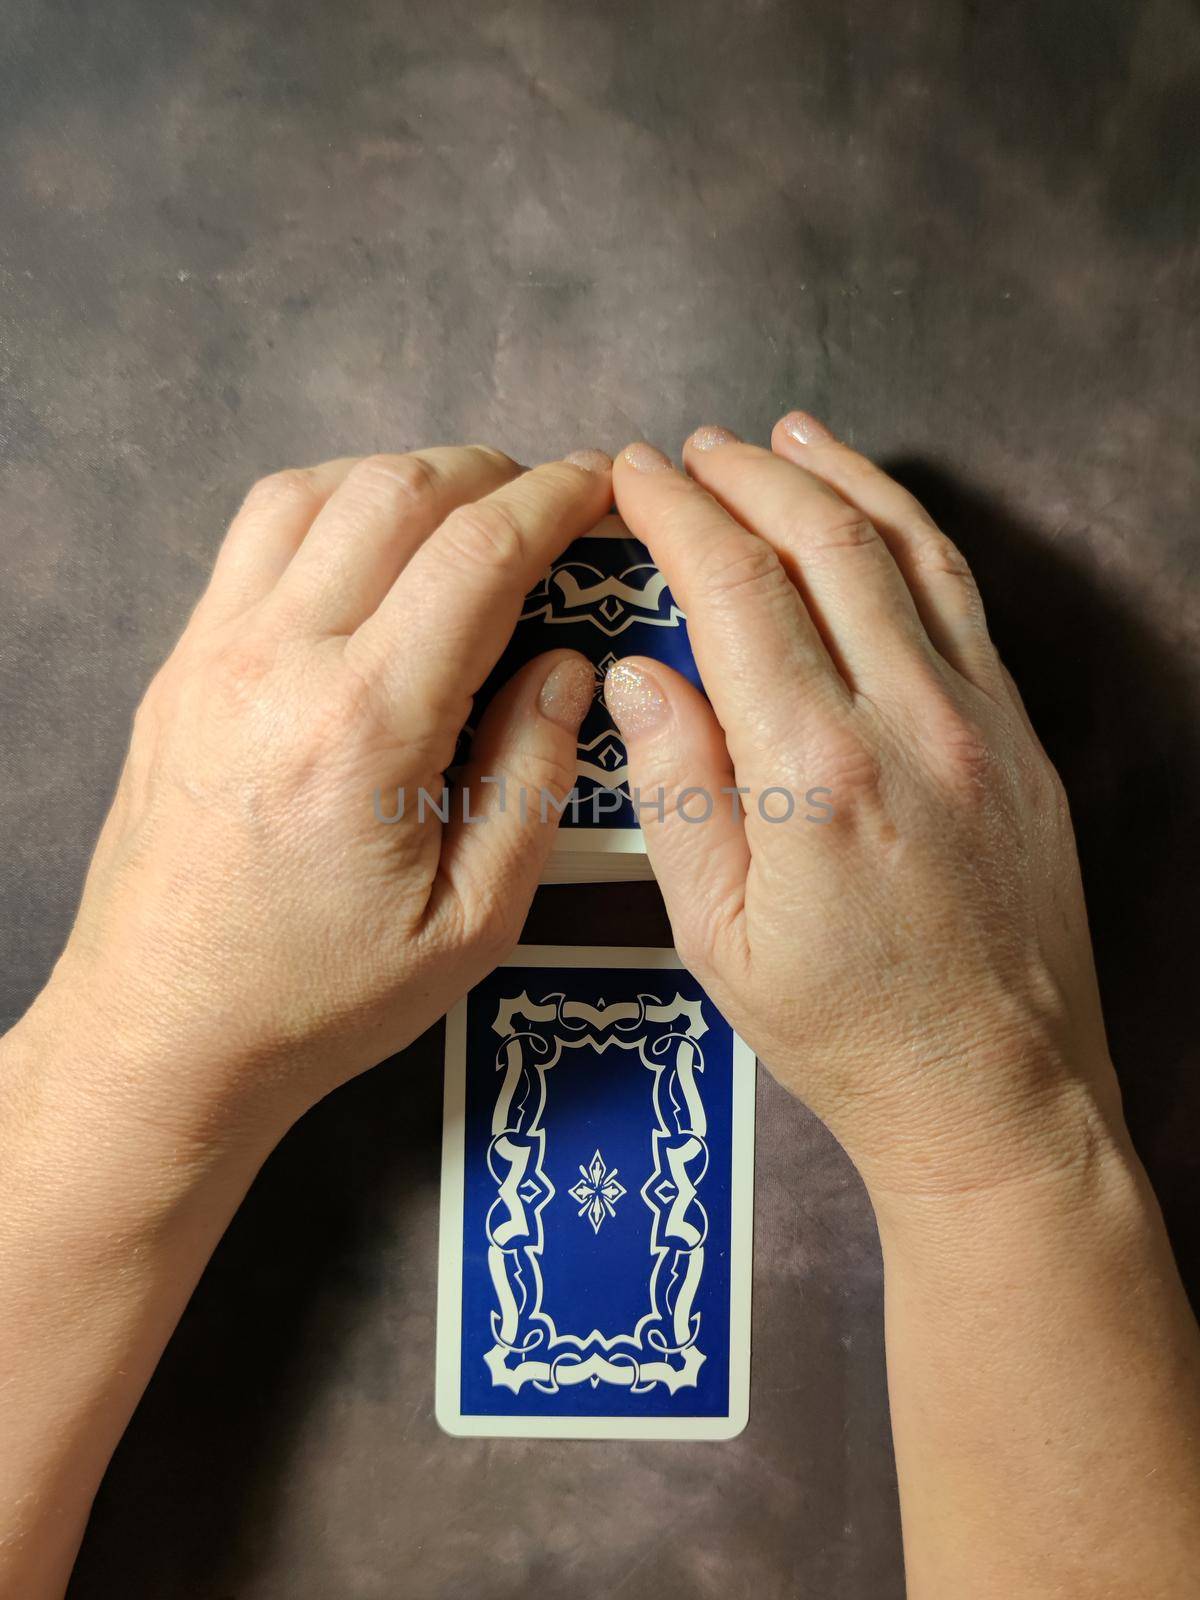 female hands on deck of tarot cards on dark vintage background, view from above